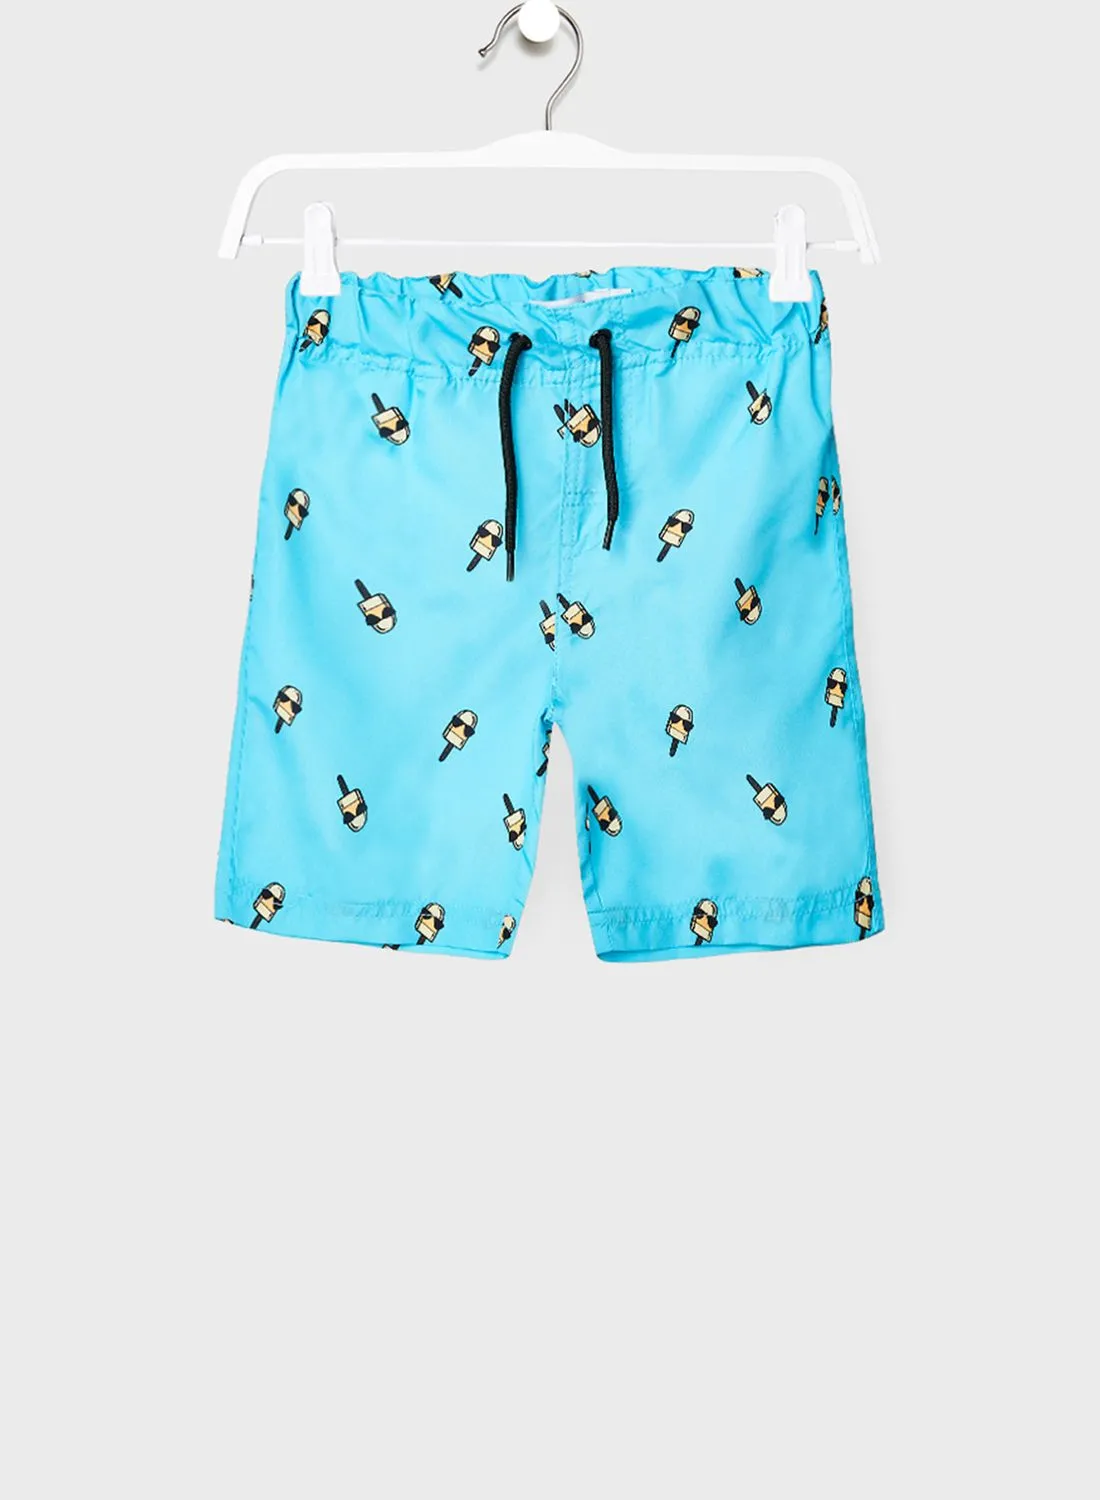 NAME IT Kids All-Over Print Shorts